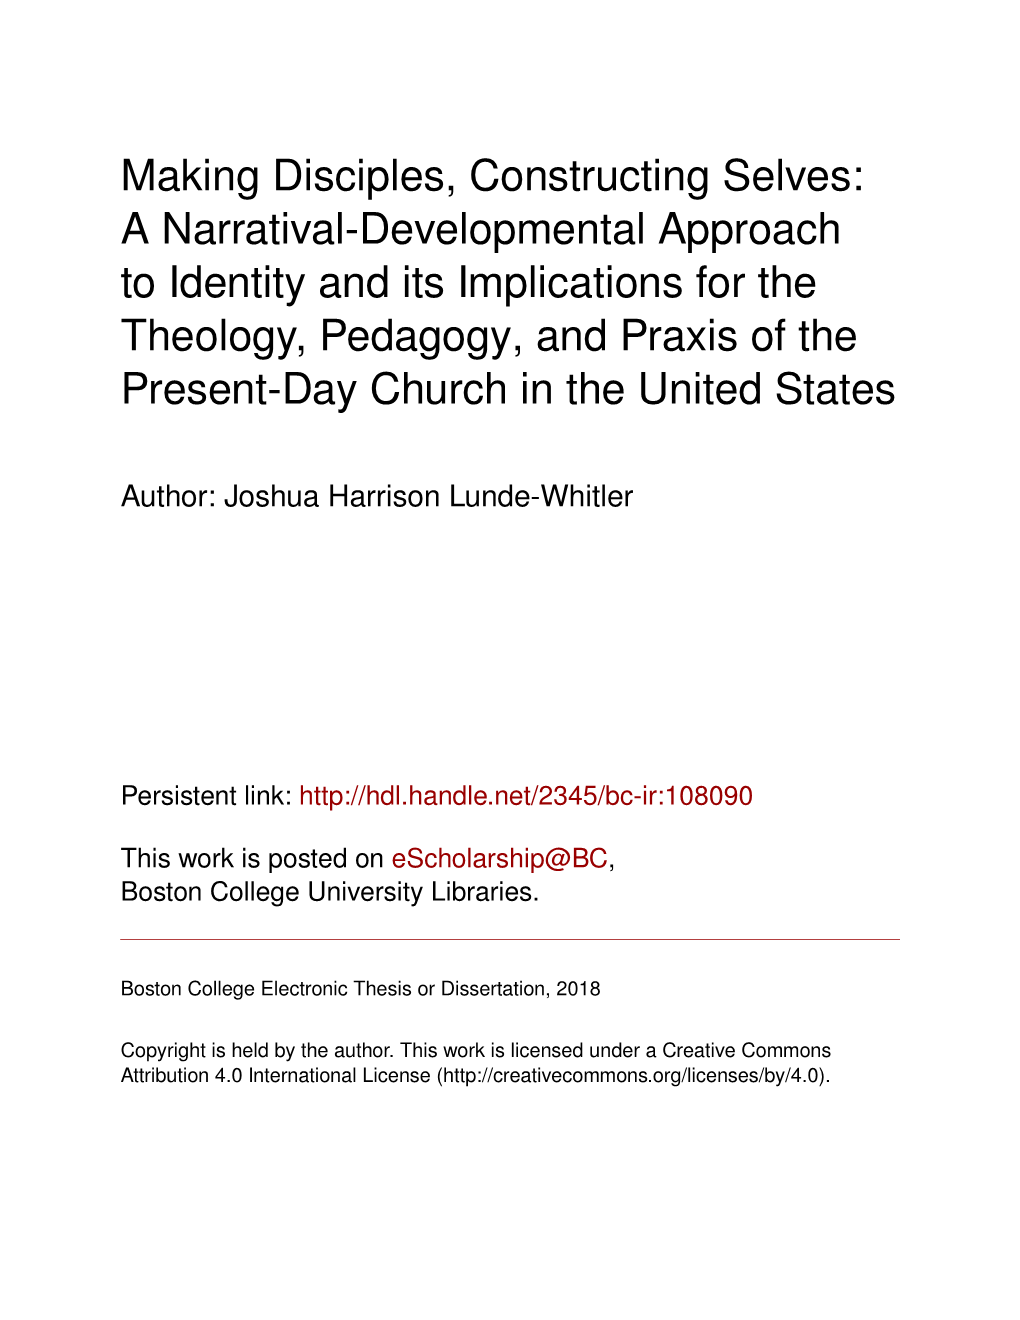 A Narratival-Developmental Approach to Identity and Its Implications for the Theology, Pedagogy, and Praxis of the Present-Day Church in the United States